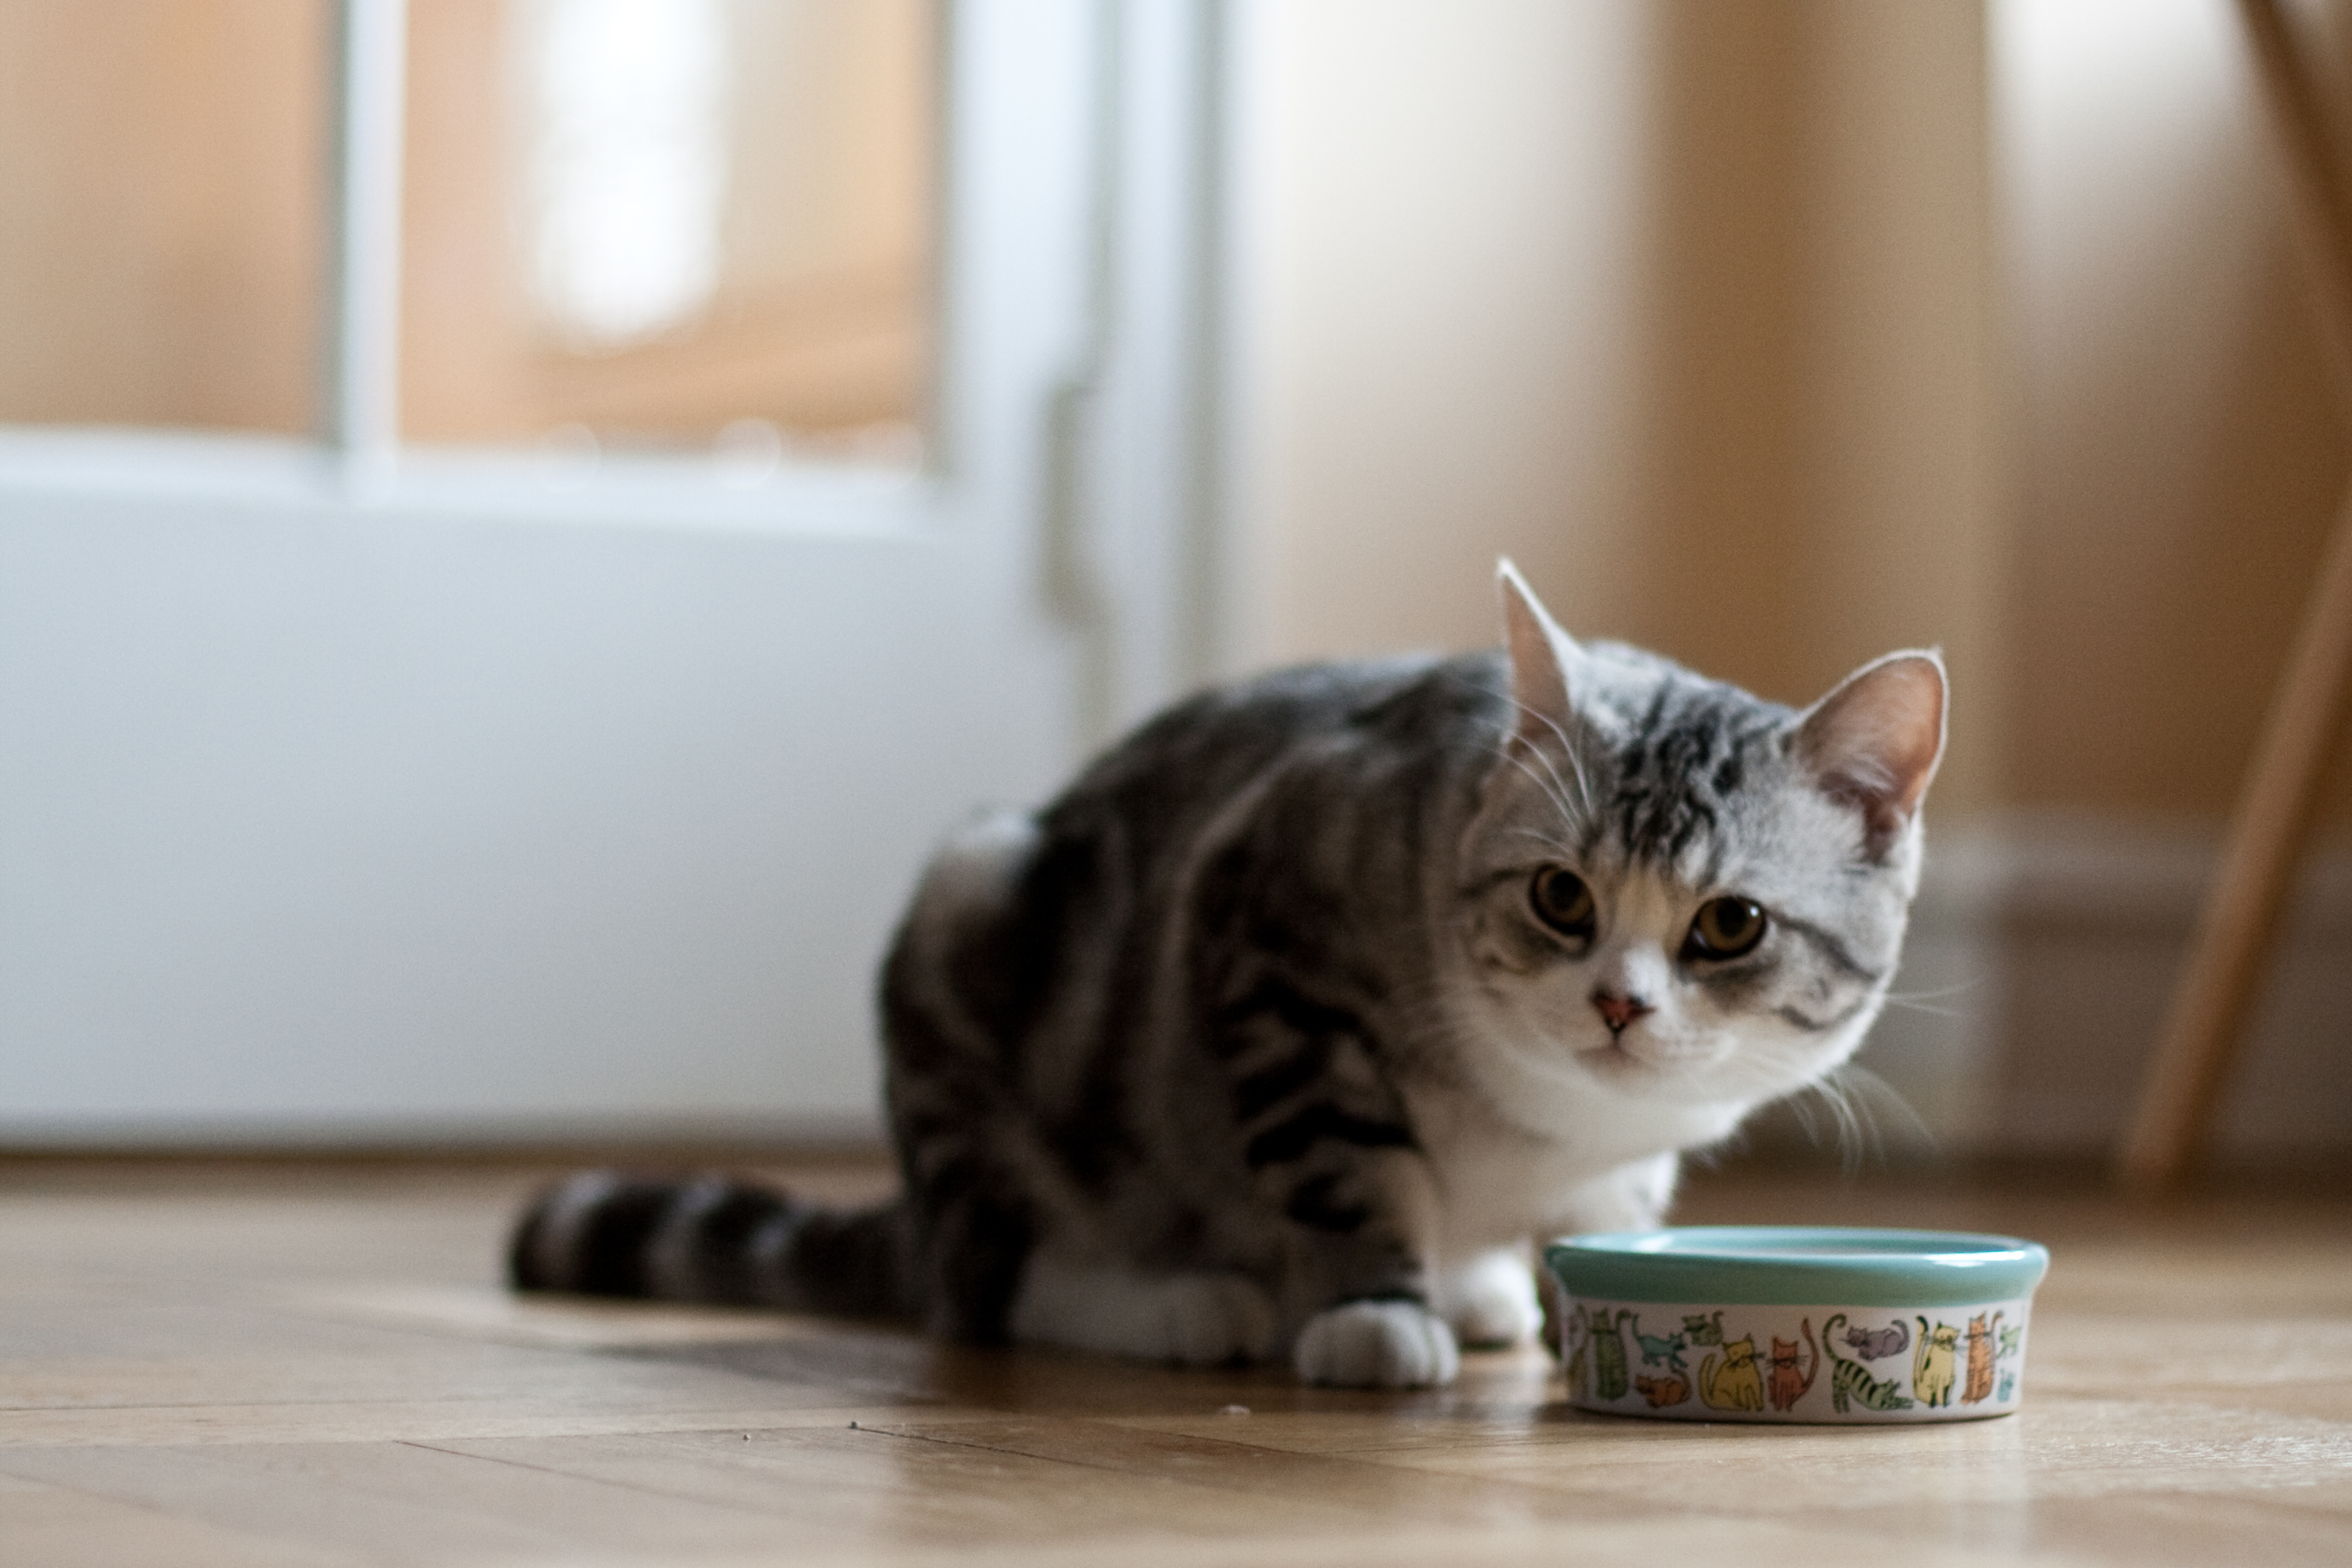 Should You Feed Your Cat Offal?